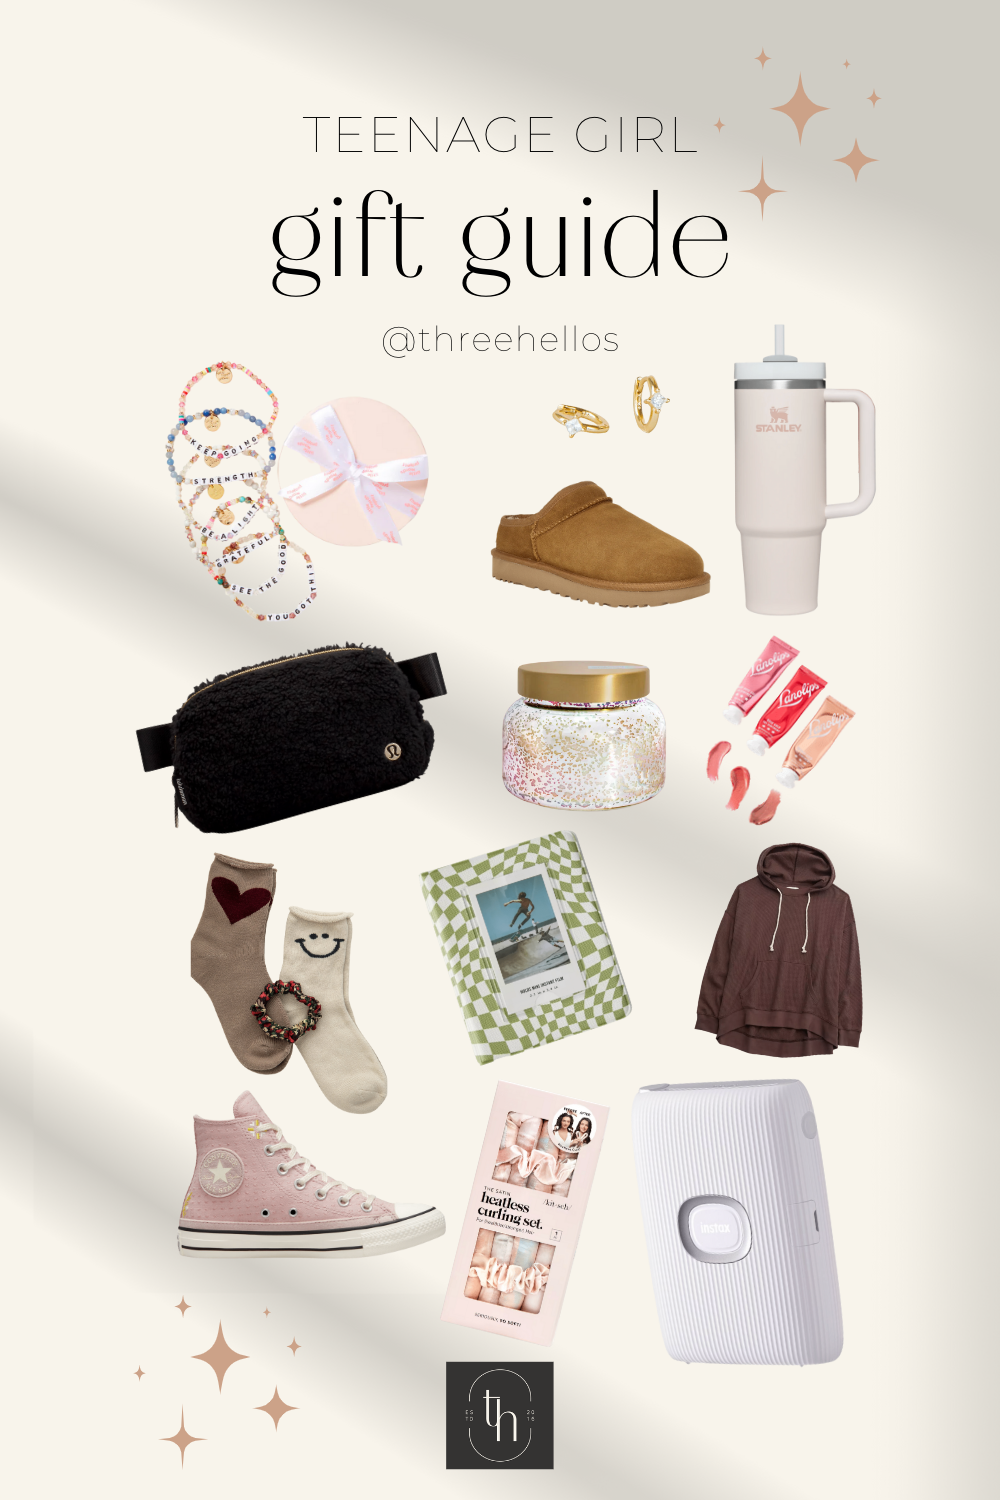 A Gift Guide for Teens and Tweens - Pt 1 - Pretty Real